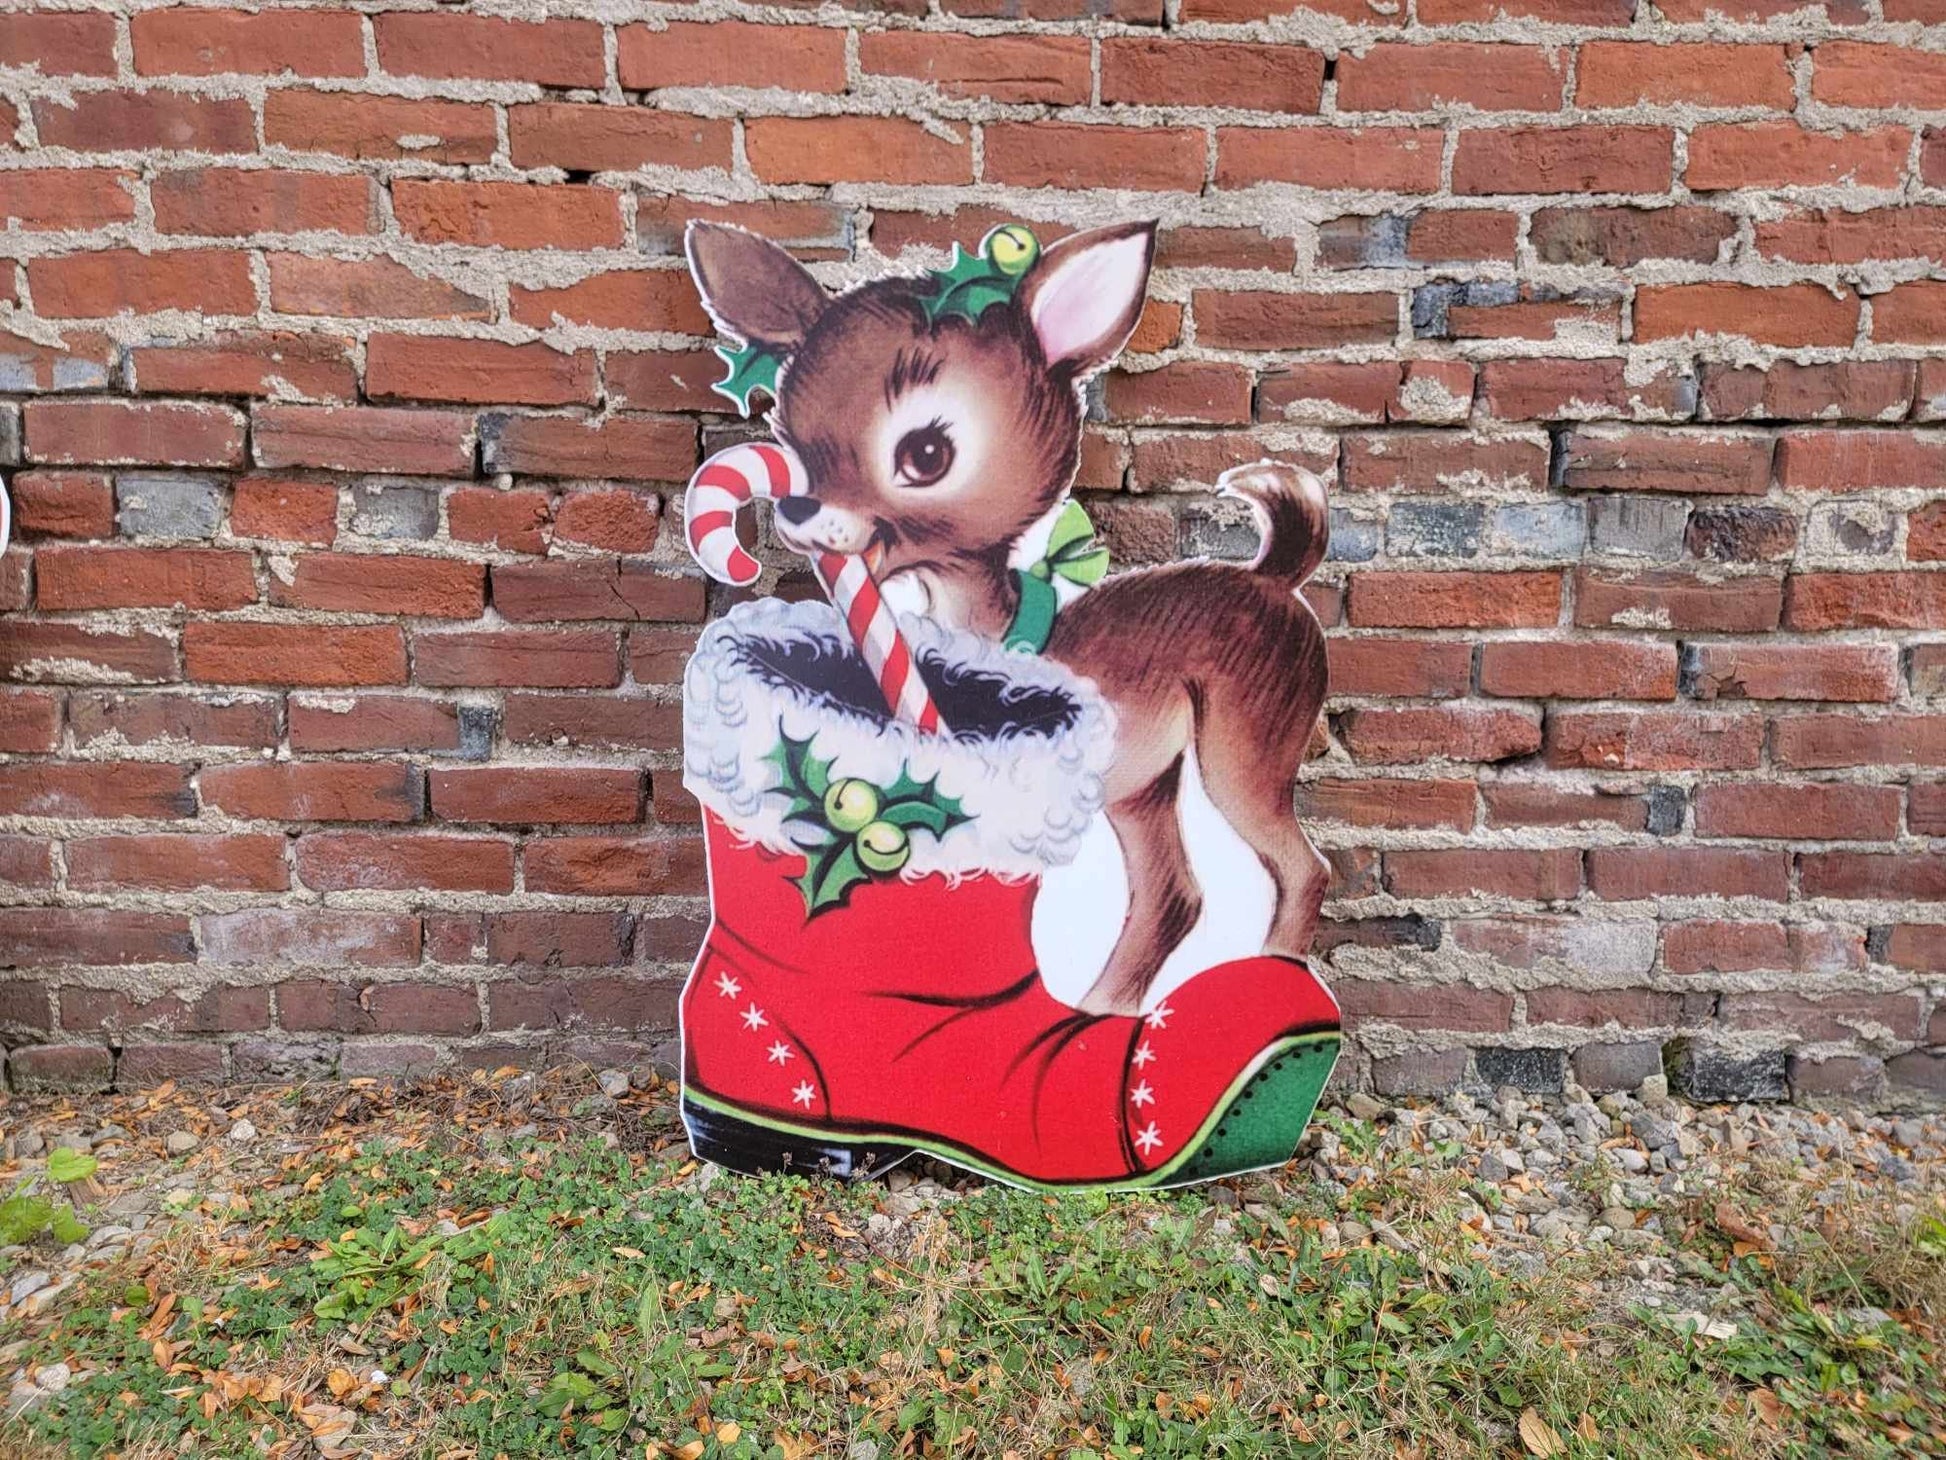 Vintage Yard Art PVC Reindeer Baby Santas boot Candy Cane Christmas Outdoor Weather Proof Printed image Yard Decor